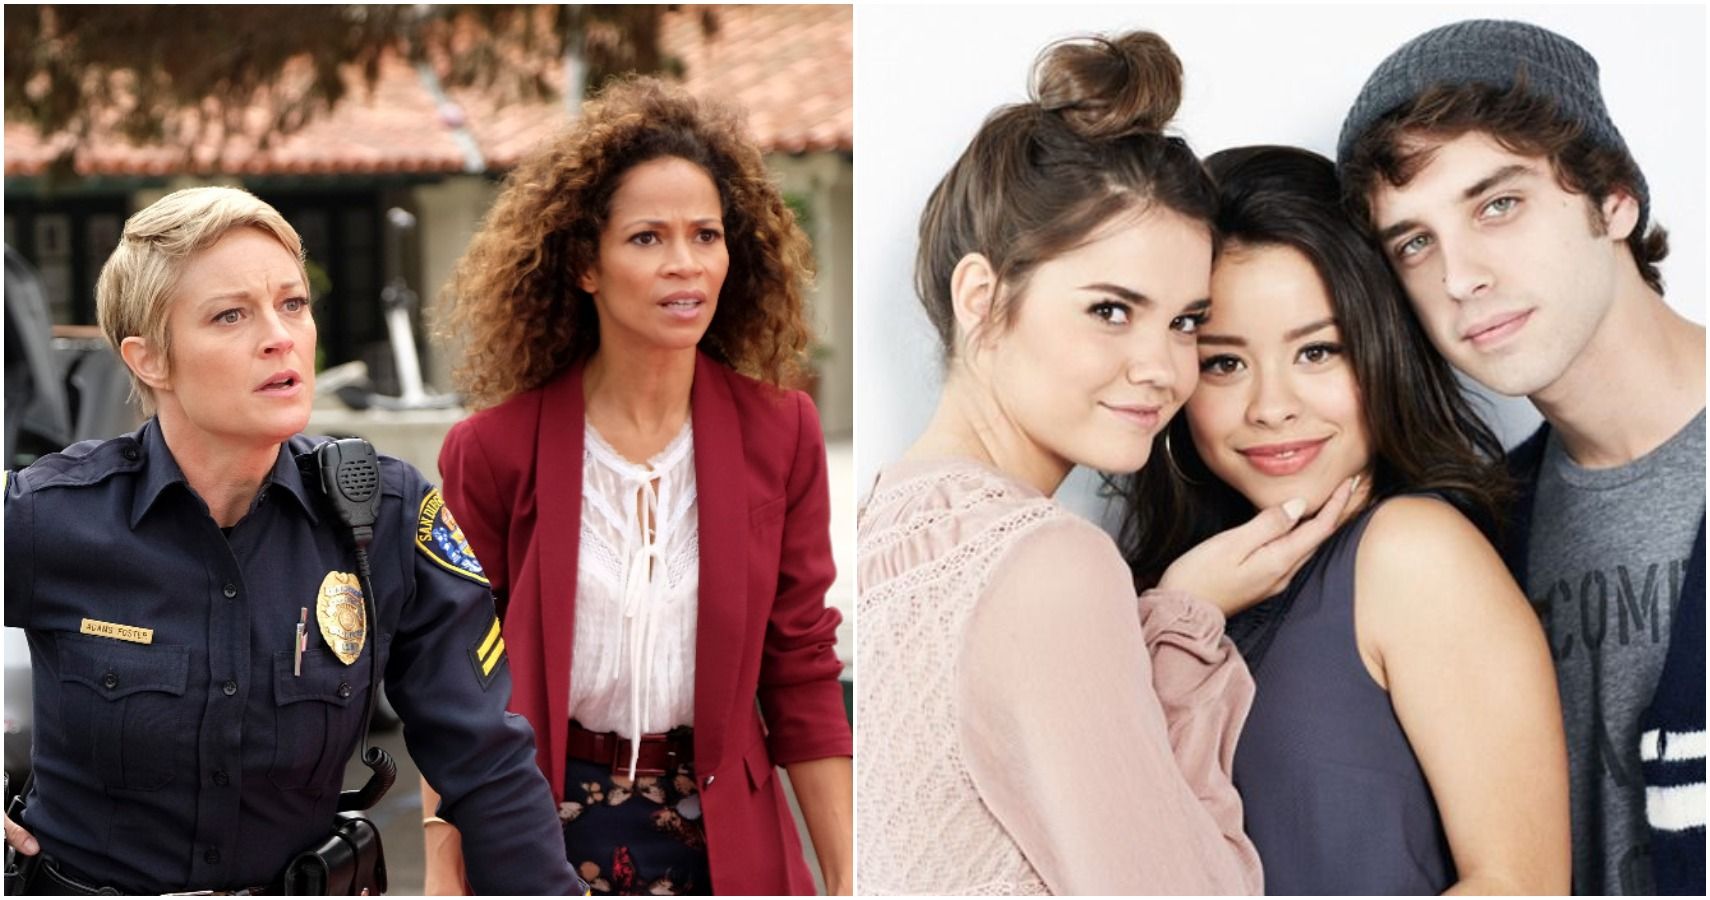 The Fosters Each Season Ranked According To The Rotten Tomatoes Audience Score